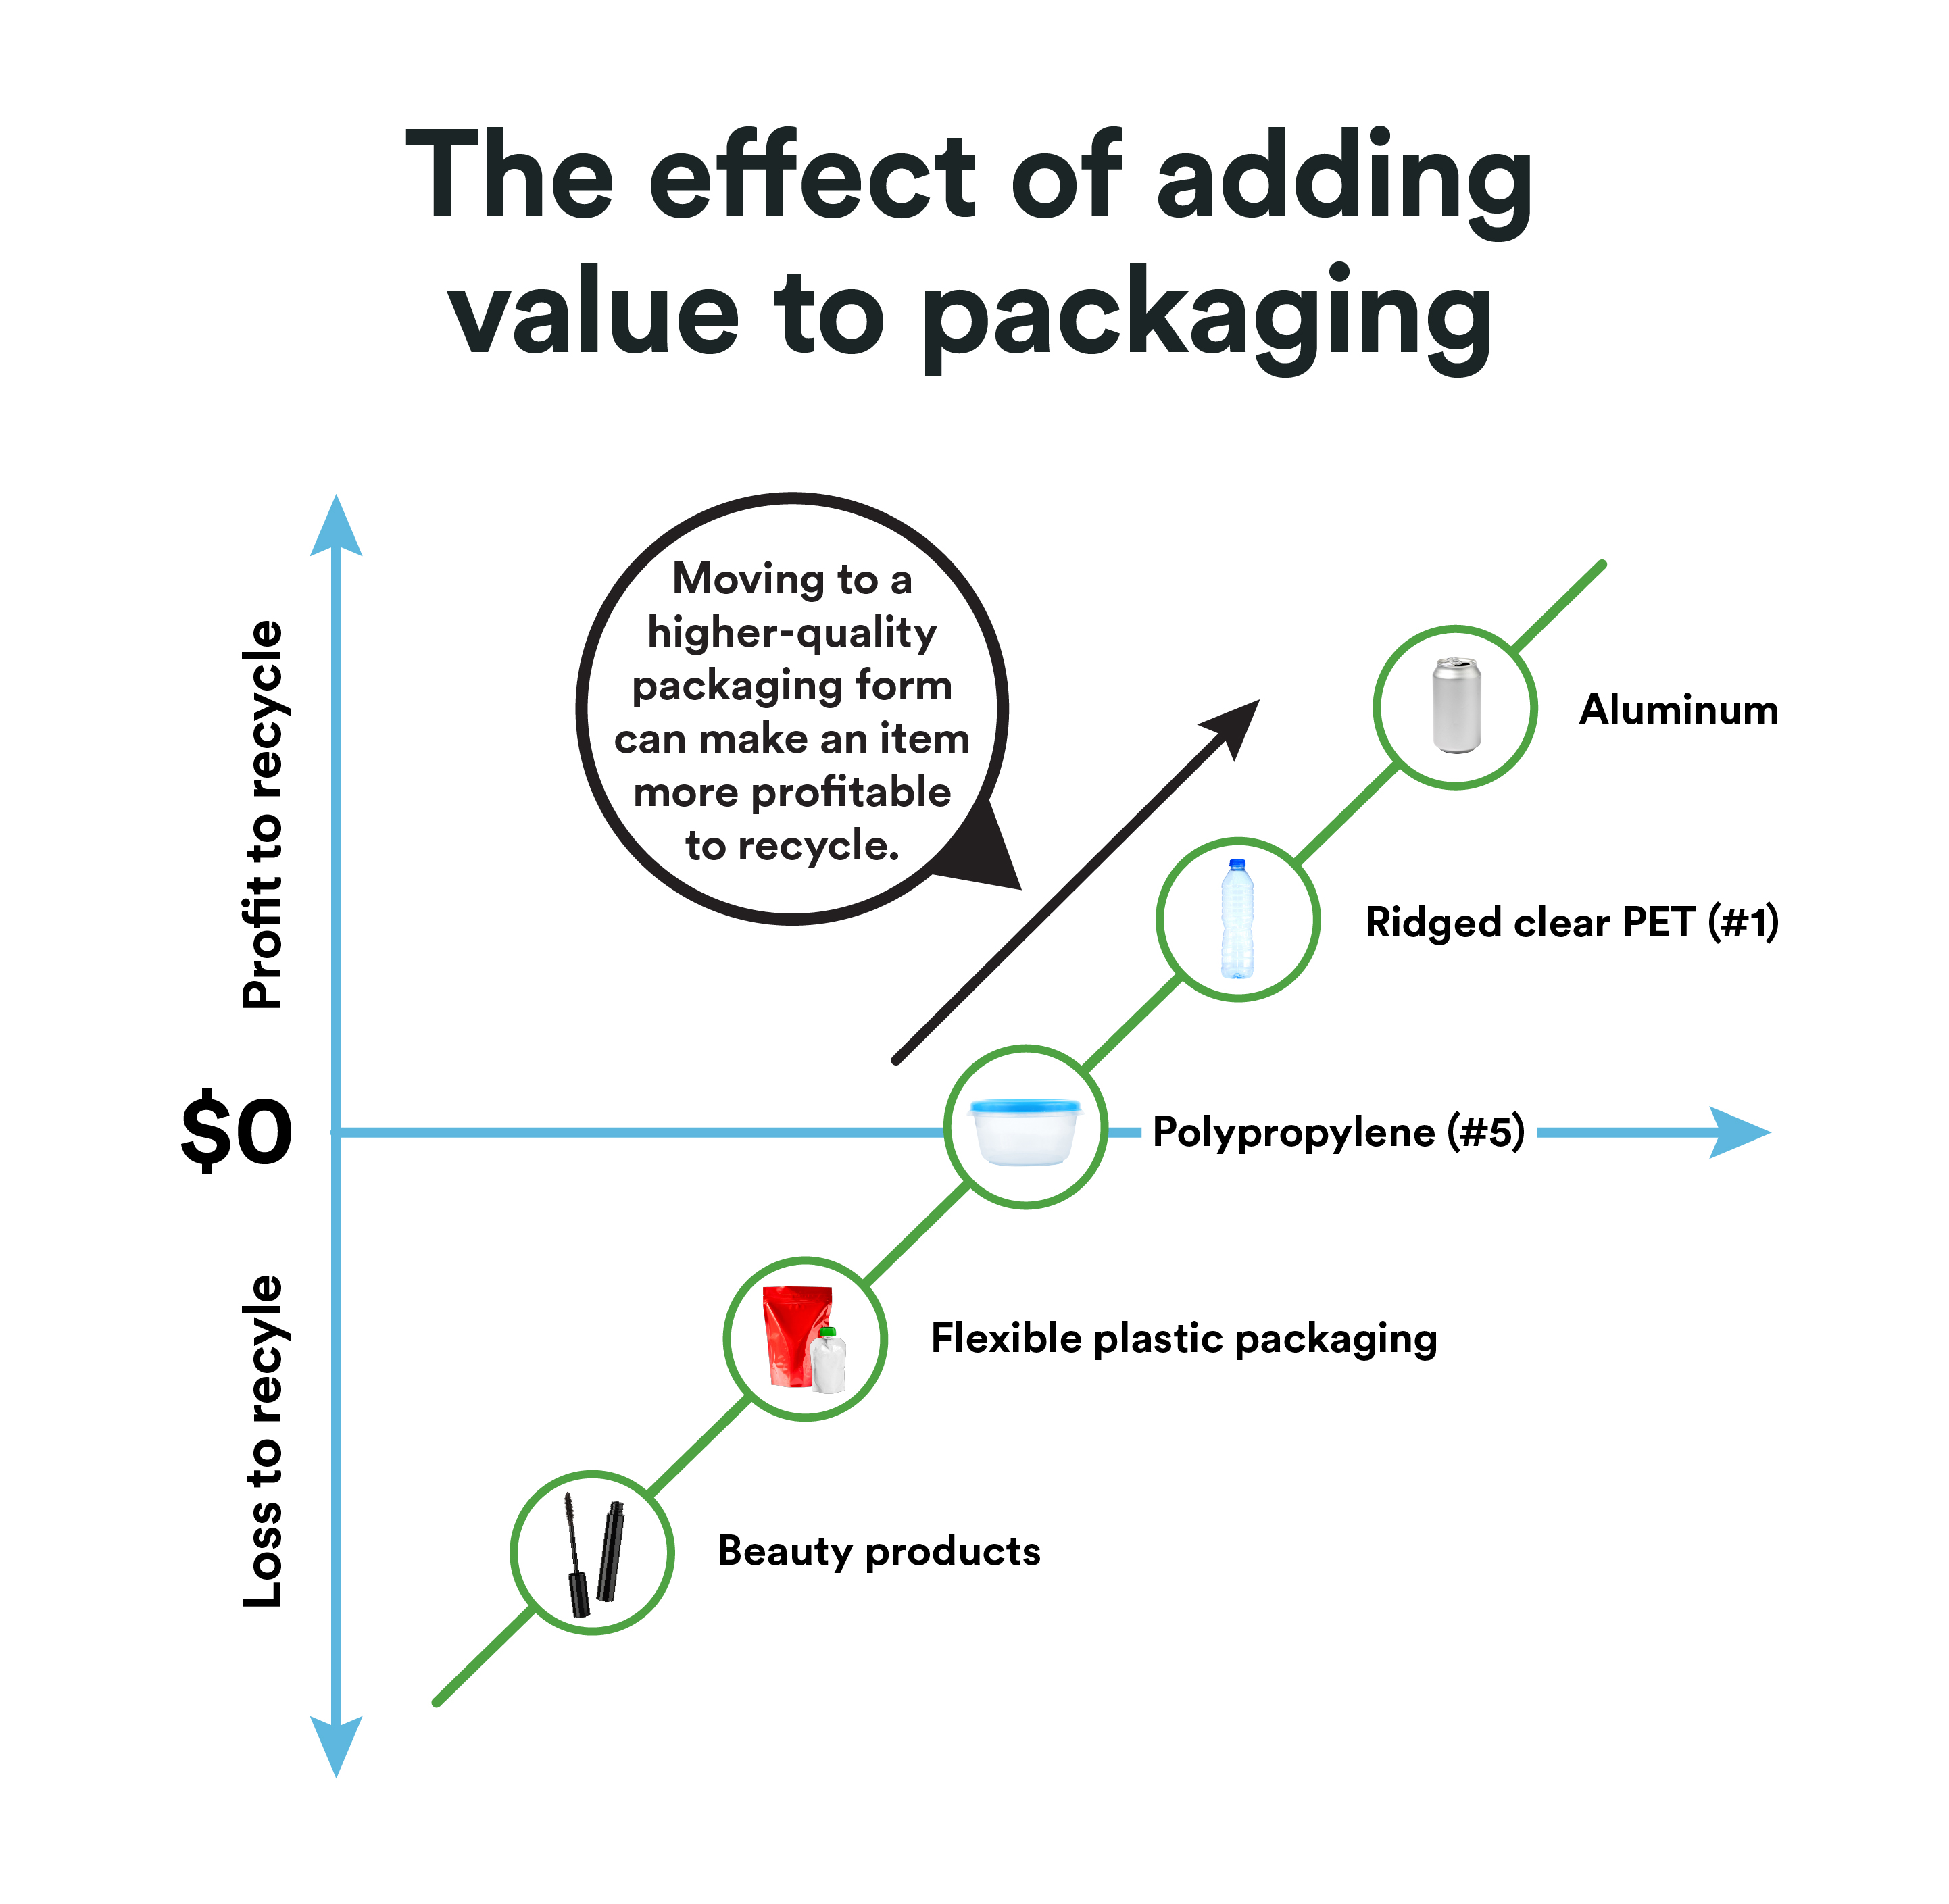 Chart showing the effect of making packaging out of higher-value materials